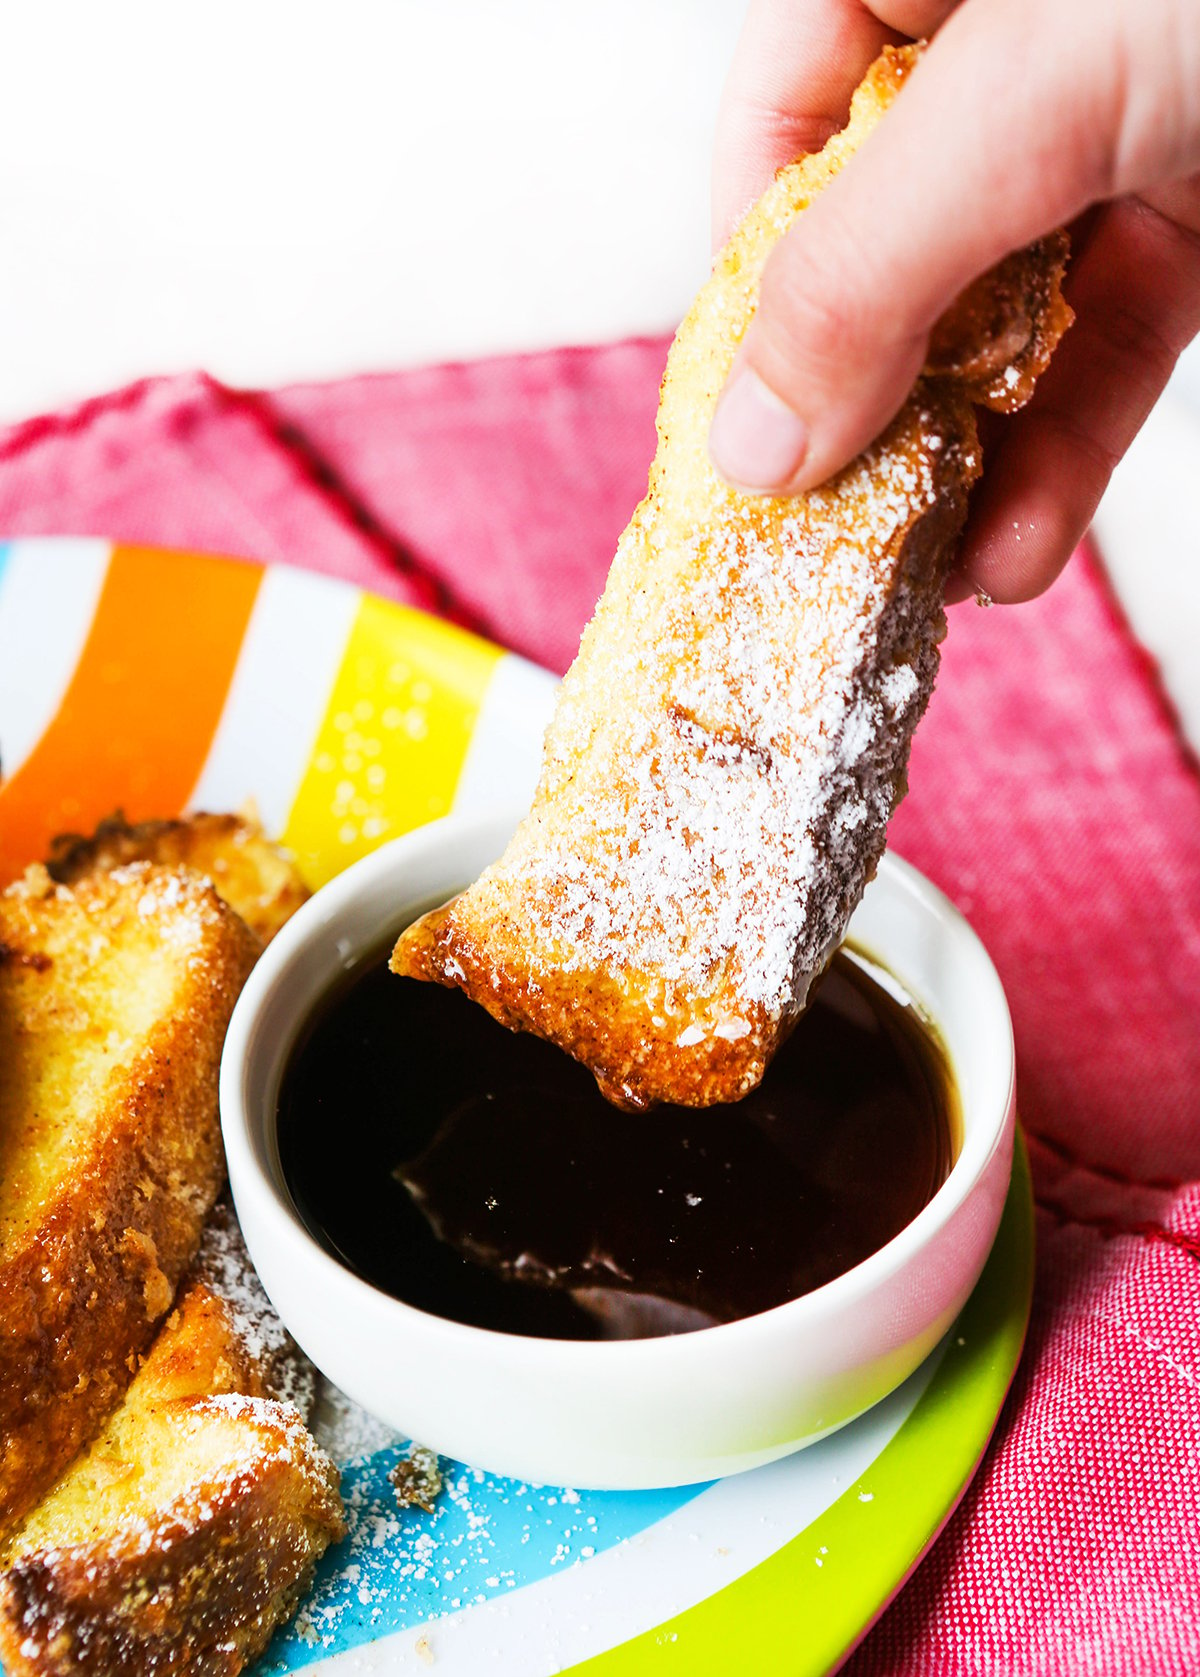 Hand dunking a French toast stick into a small bowl of maple syrup.